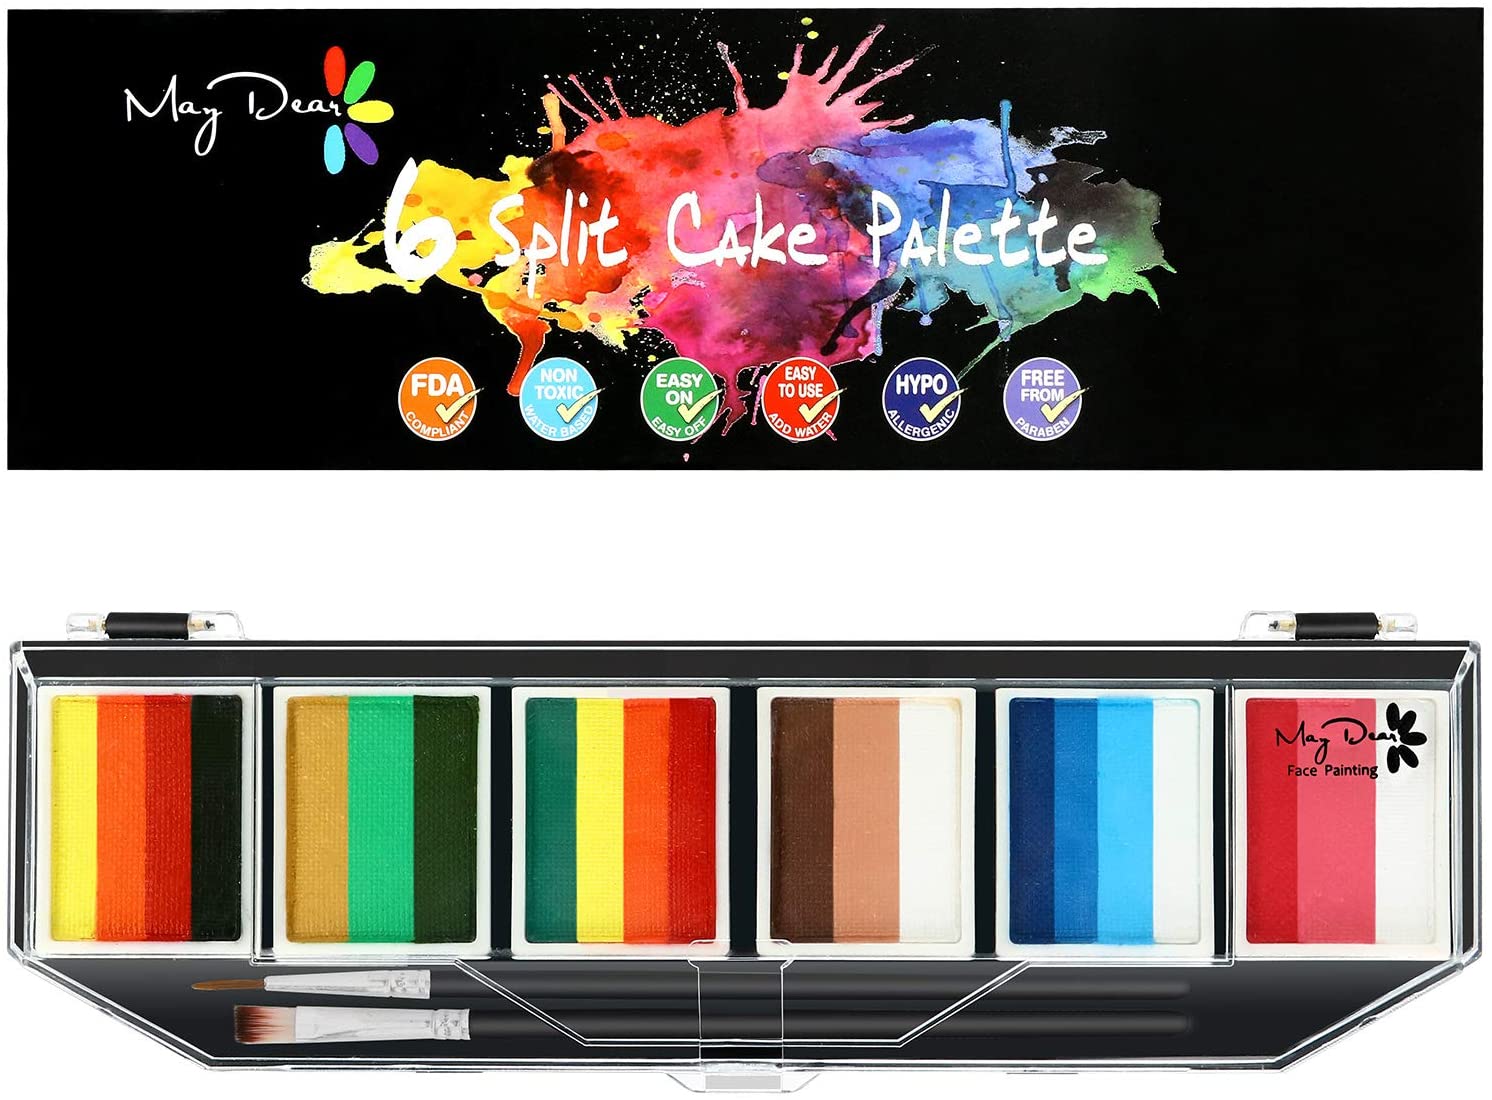 Maydear Face Painting Kit for Kids with 6 Colors Split Cake Palette, Safe &  Non-Toxic Makeup Face Paint Kit 